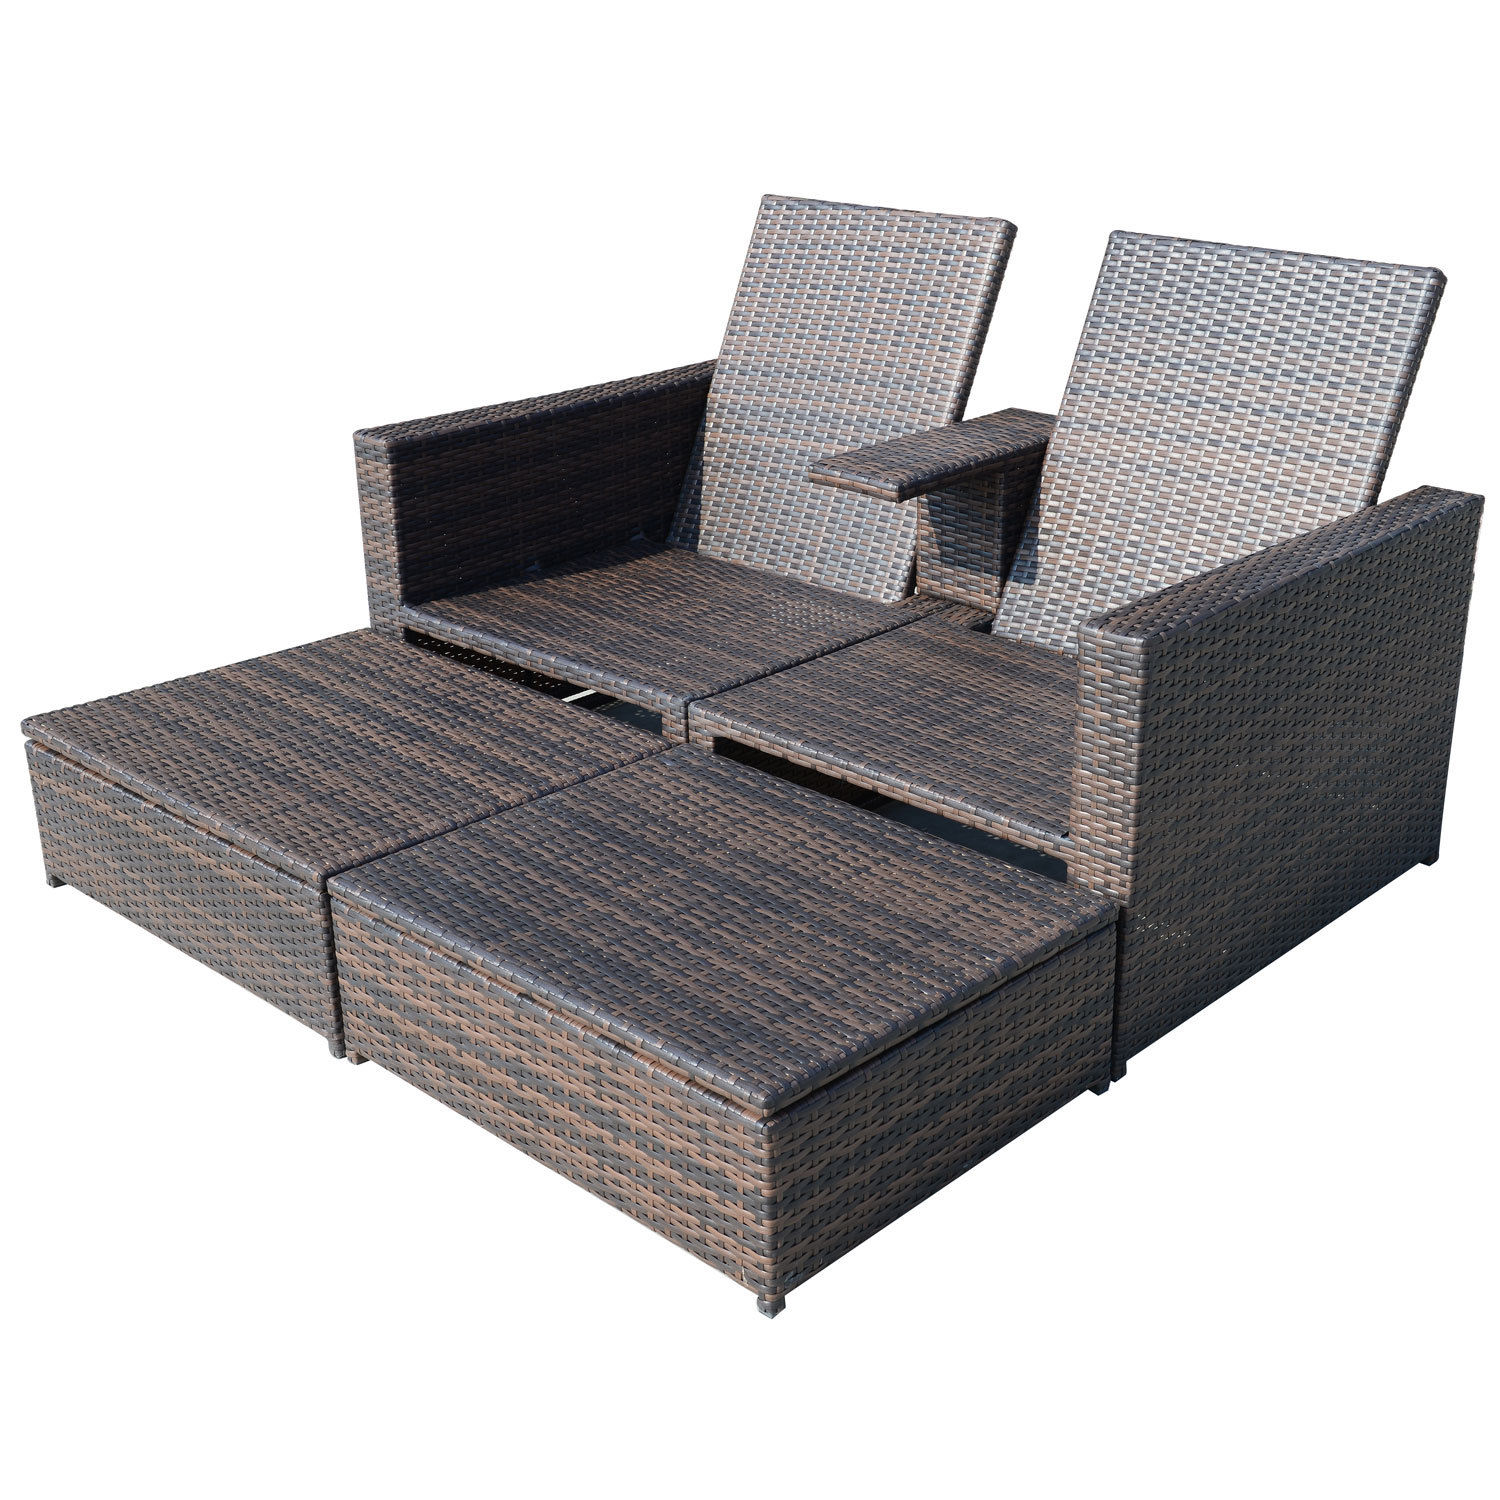 Outsunny 3 Piece Patio Sofa Set Recliner Lounge Ottoman Loveseat Rattan Outdoor, seating capacity-2 - image 5 of 10